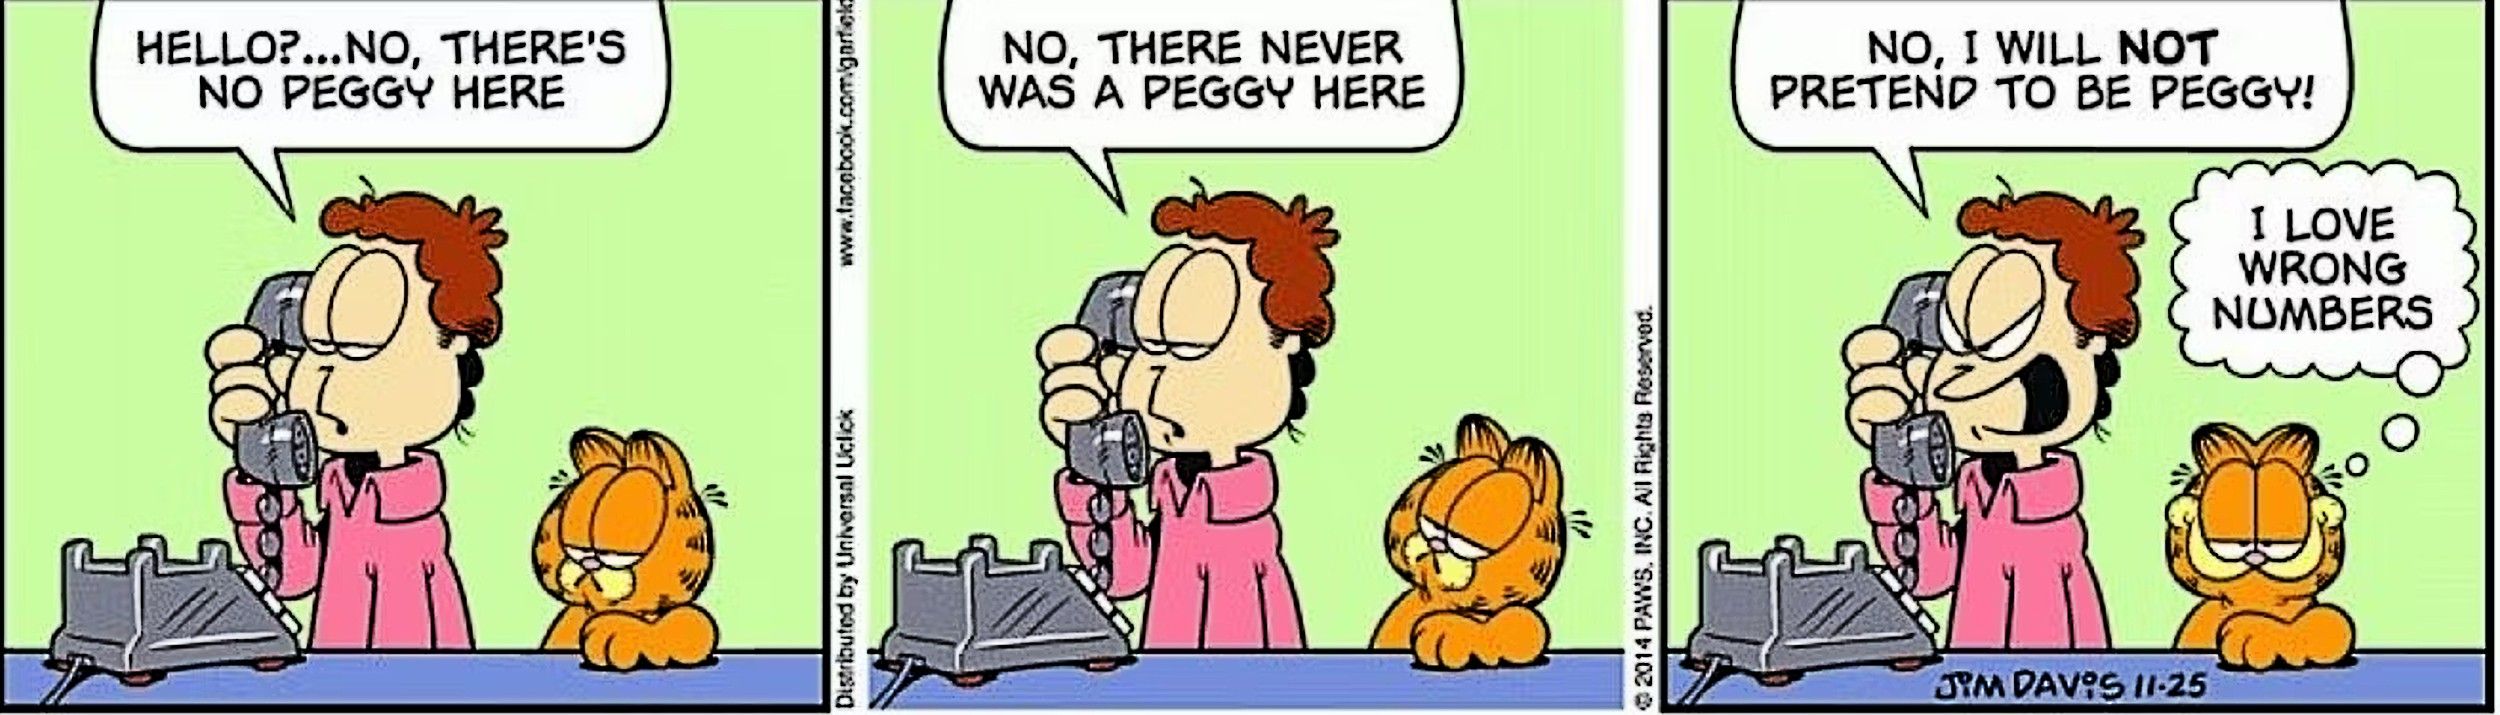 Garfield Jon deals with a sleazy request from a wrong number caller, who asks him to pretend to be 